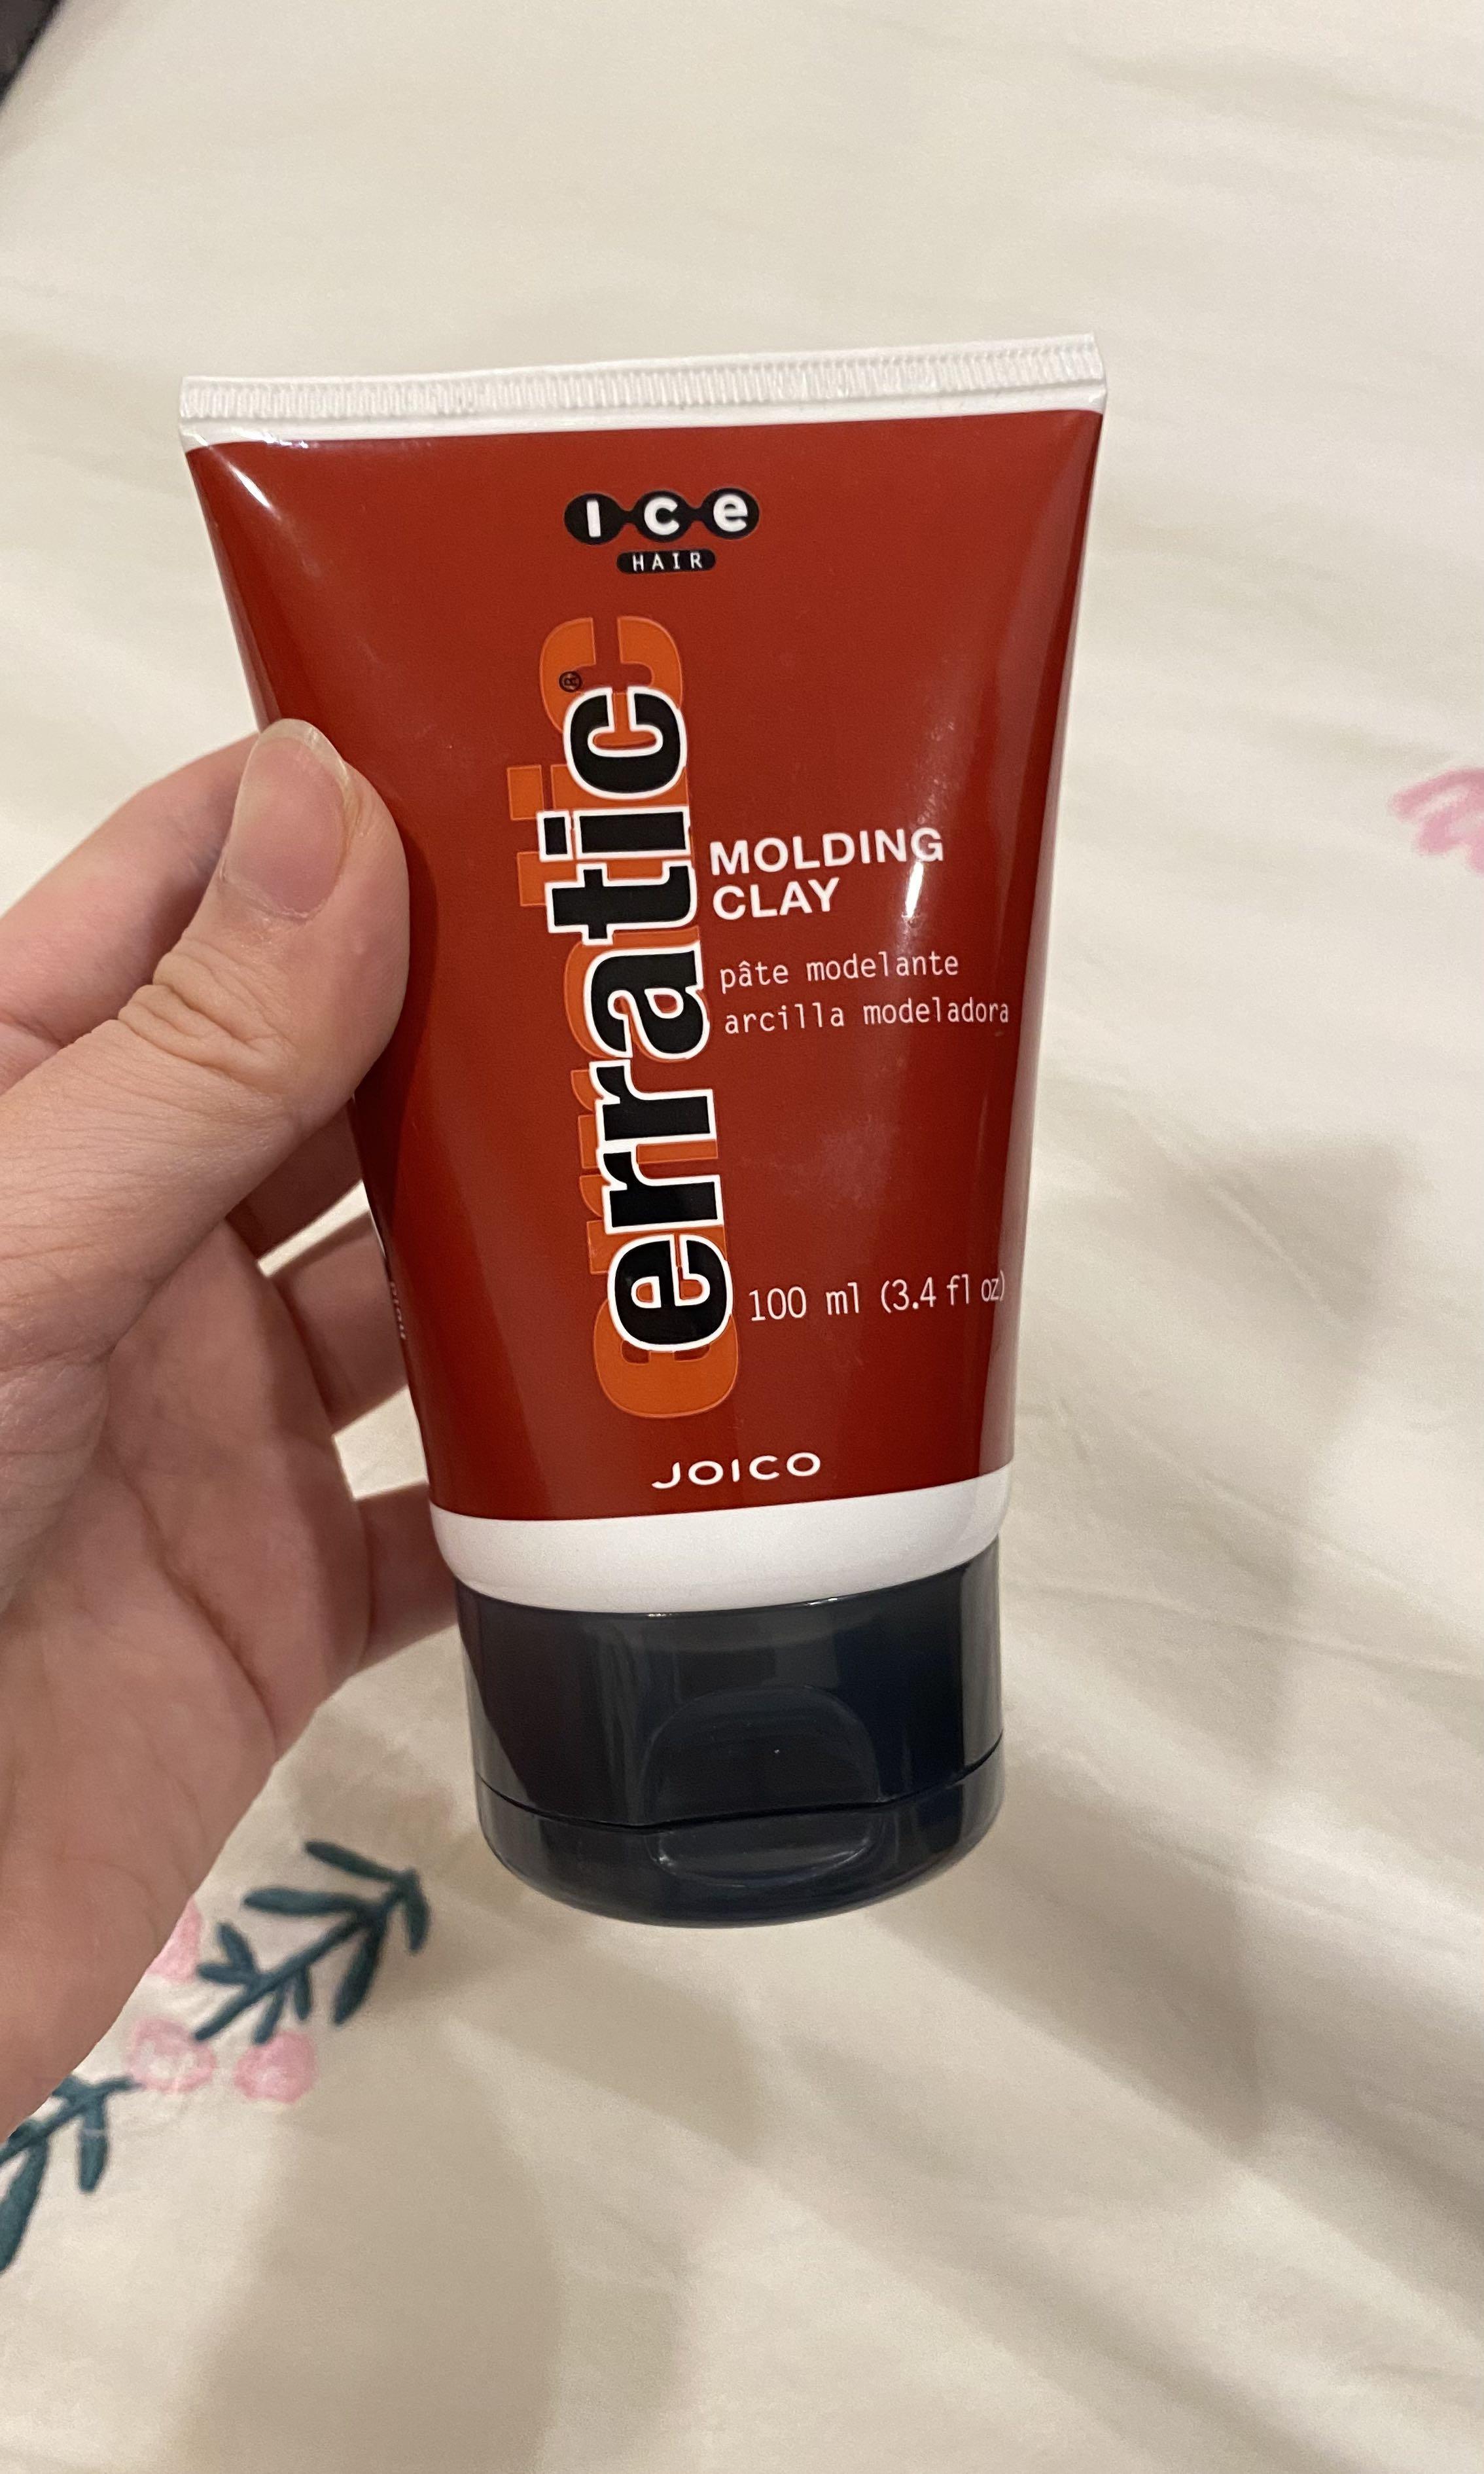 Erratic Molding Clay Joico, Beauty & Personal Care, Hair on Carousell